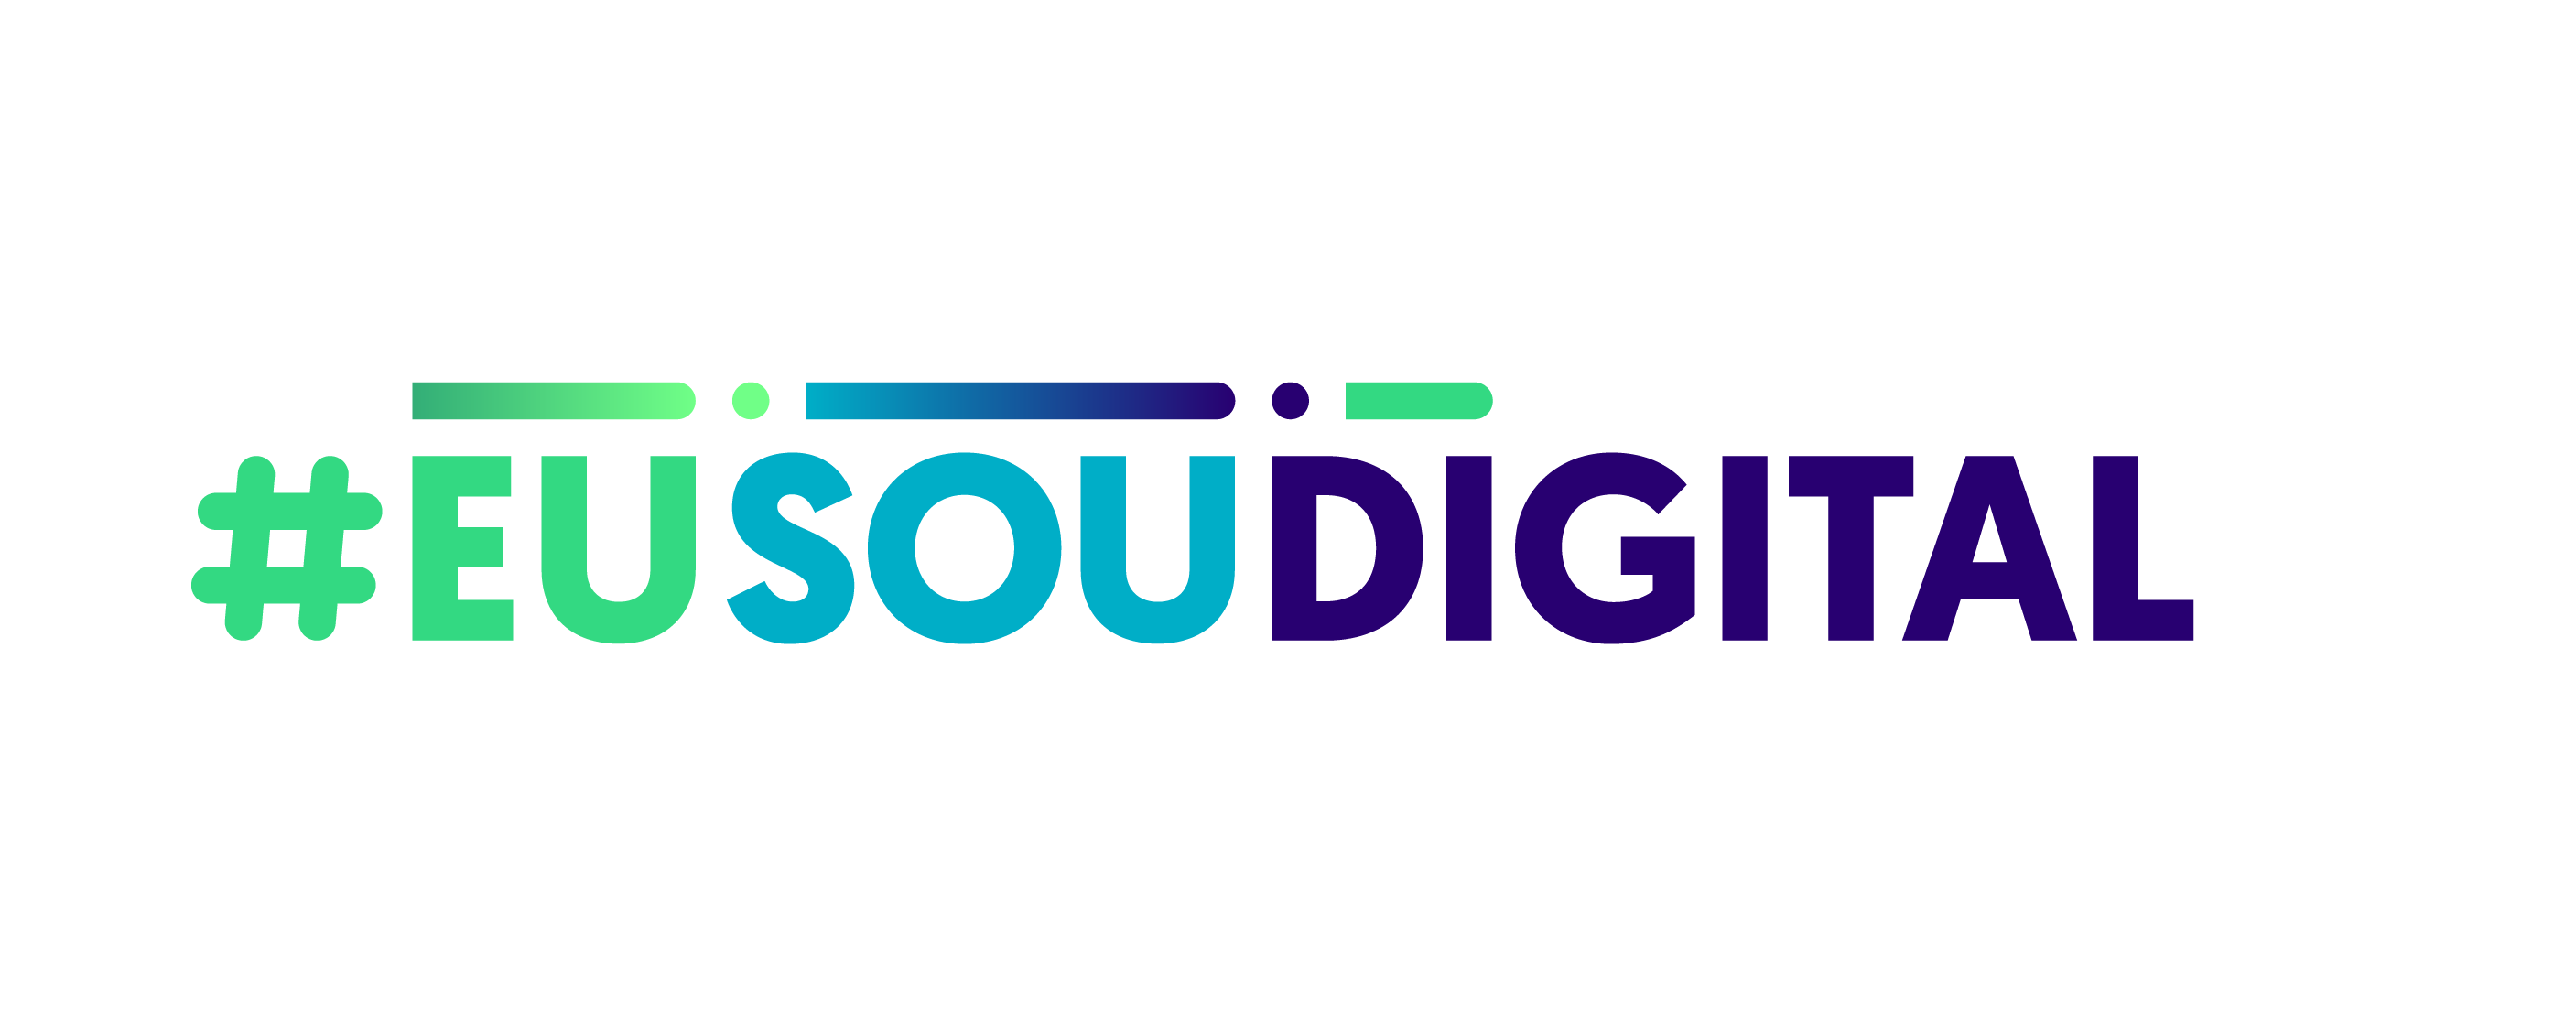 #EUSOUDIGITAL intends to raise awareness and support in the promotion and development of digital inclusion in Portugal